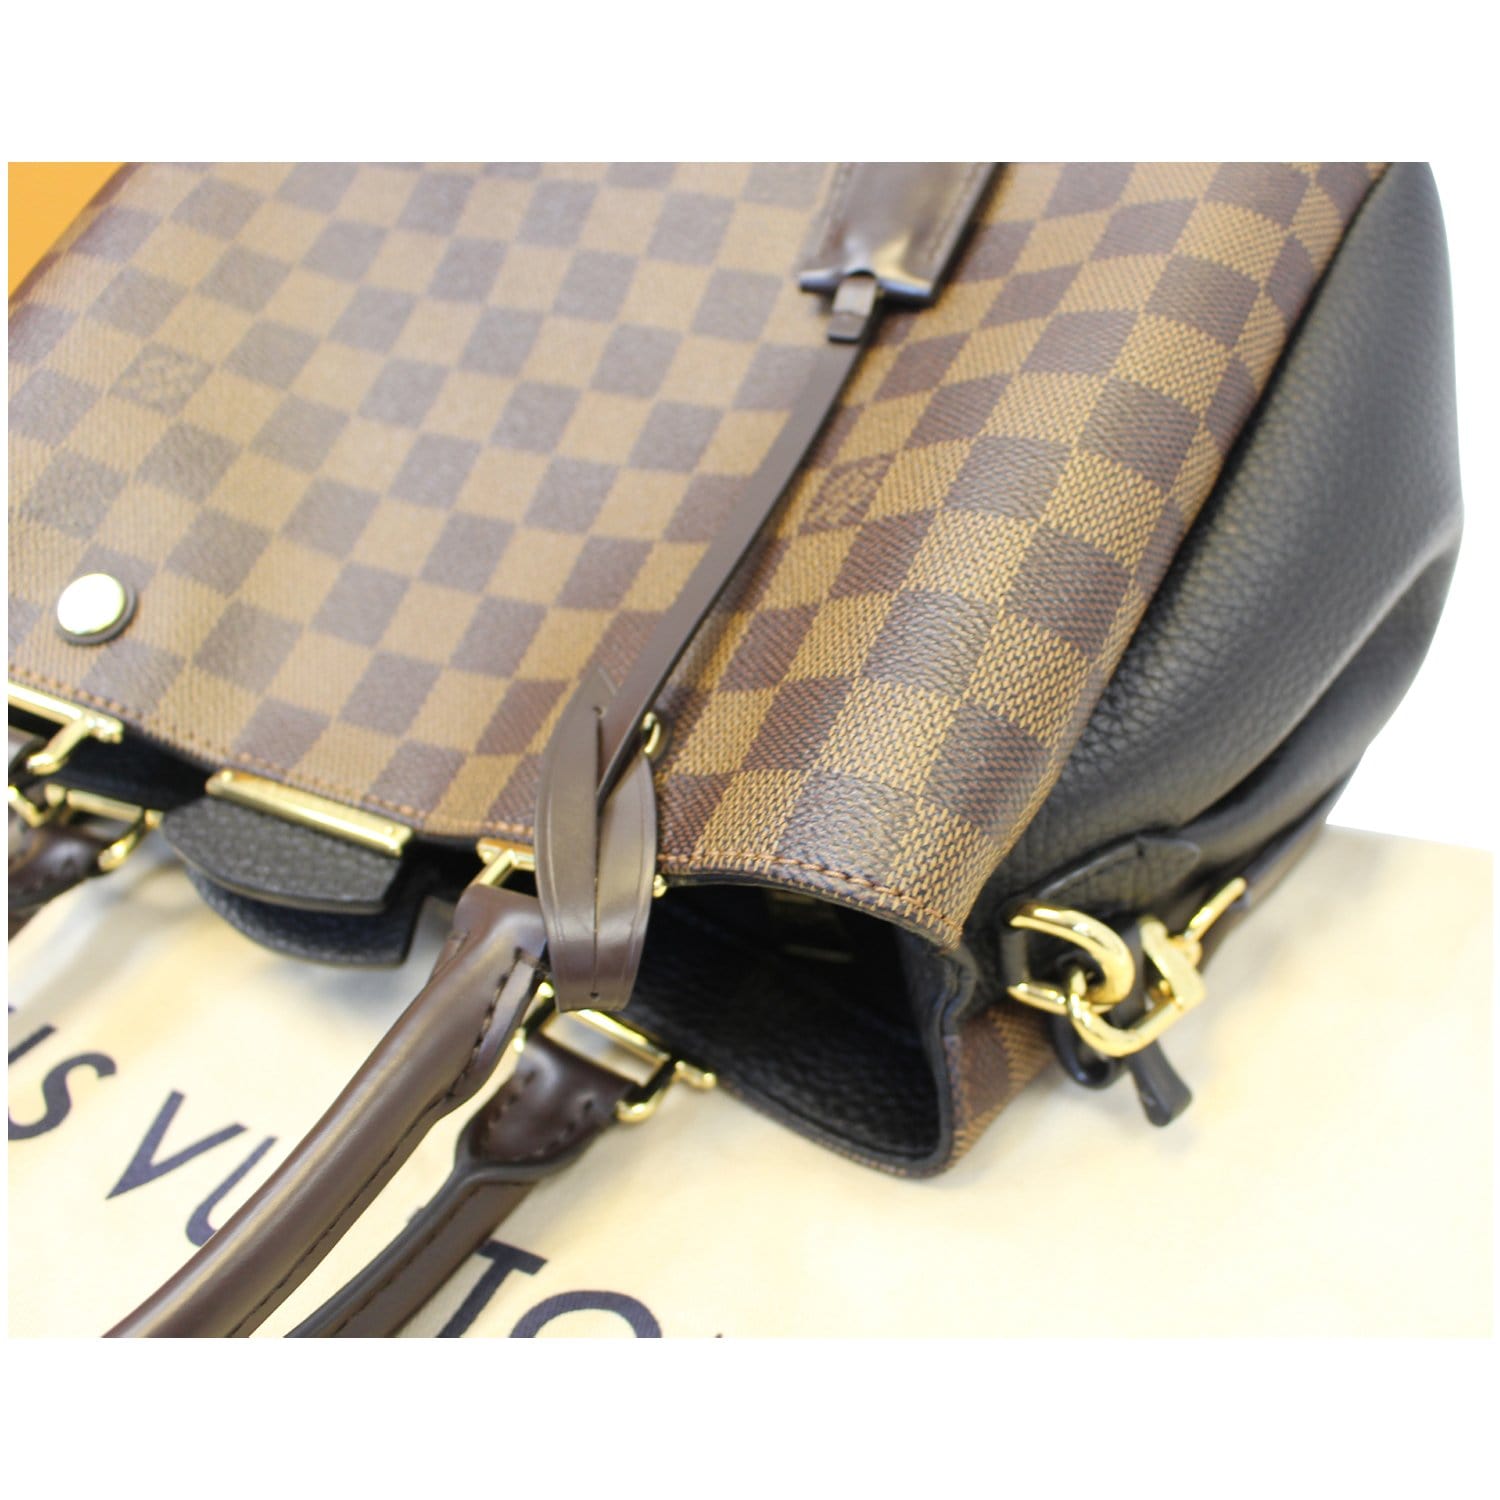 Louis Vuitton 2018 pre-owned Brittany Bag - Farfetch